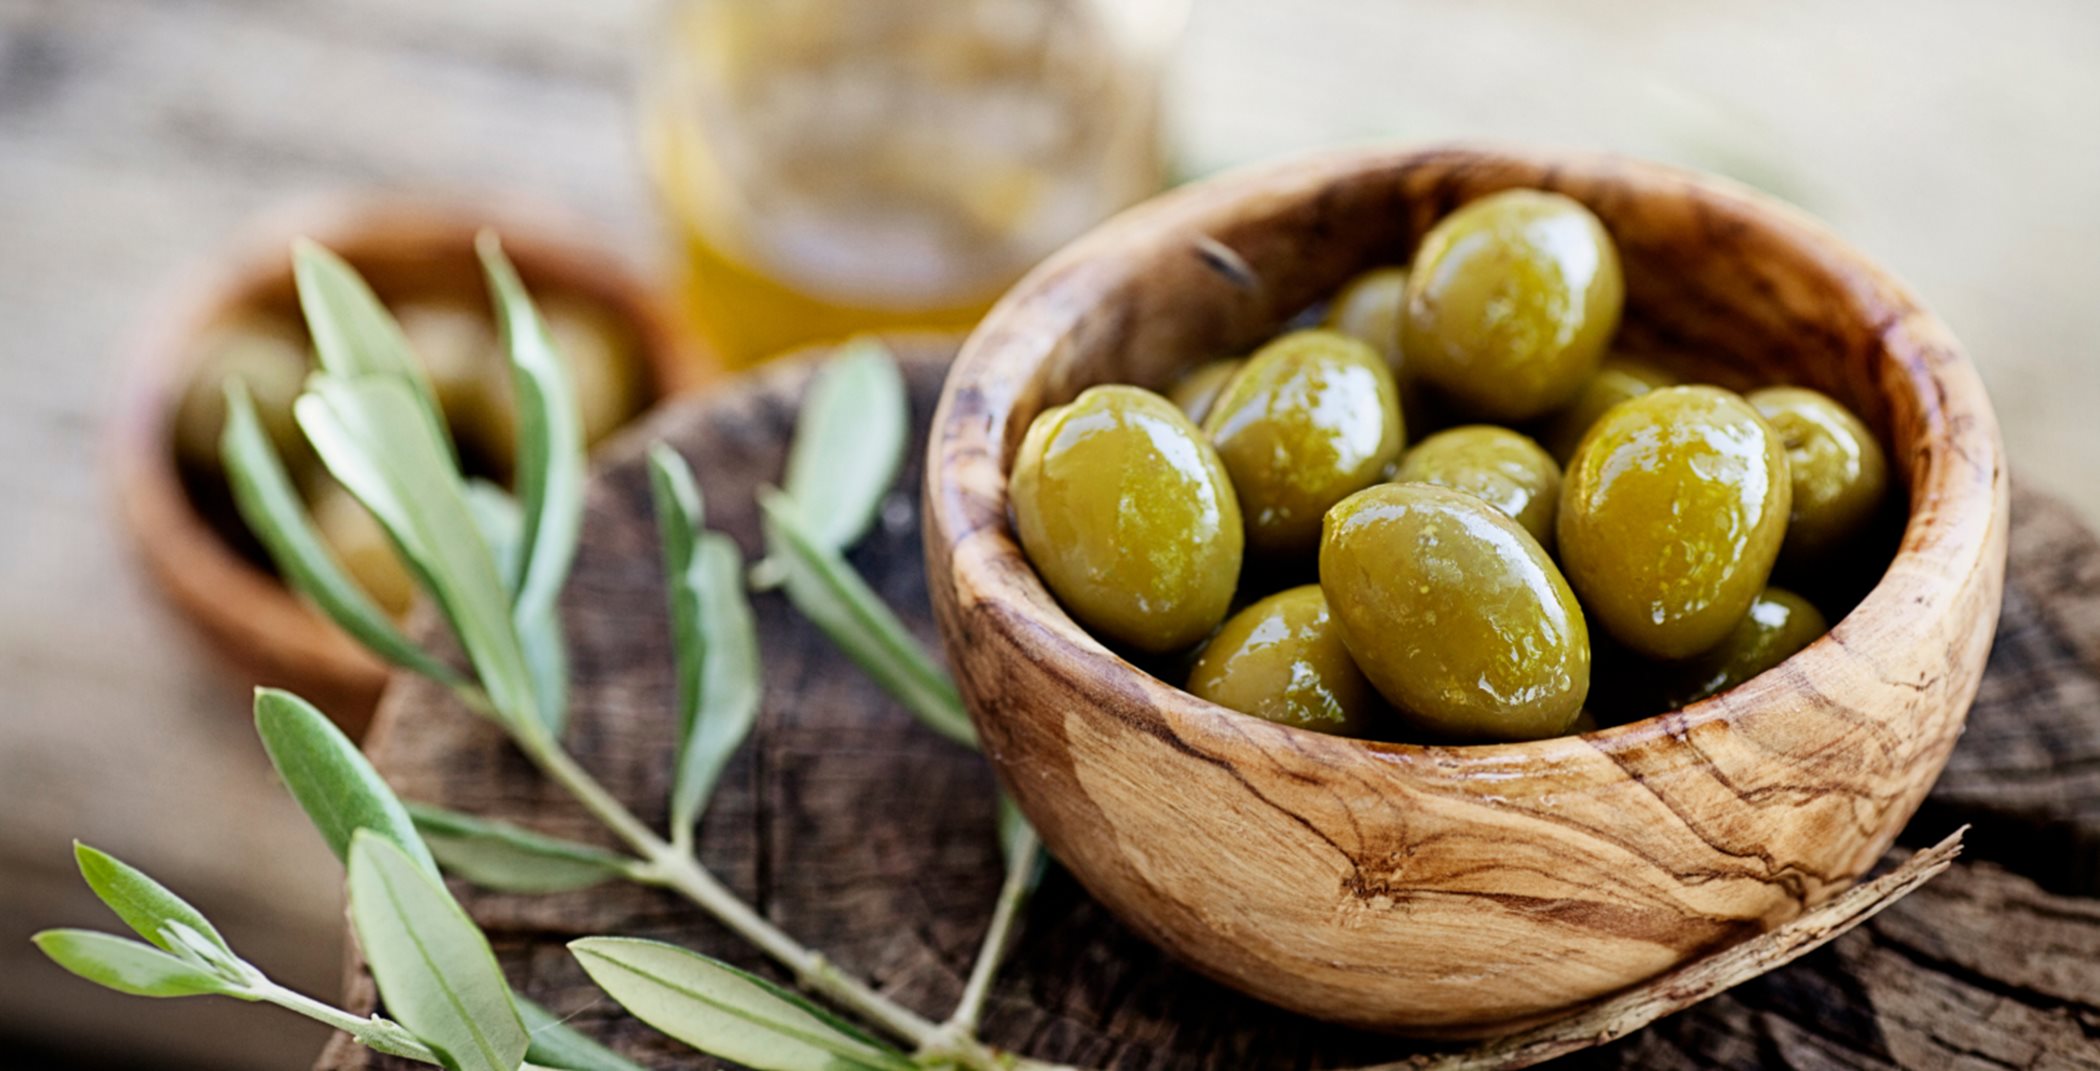 Bowl of olives next to an olive branch on a table